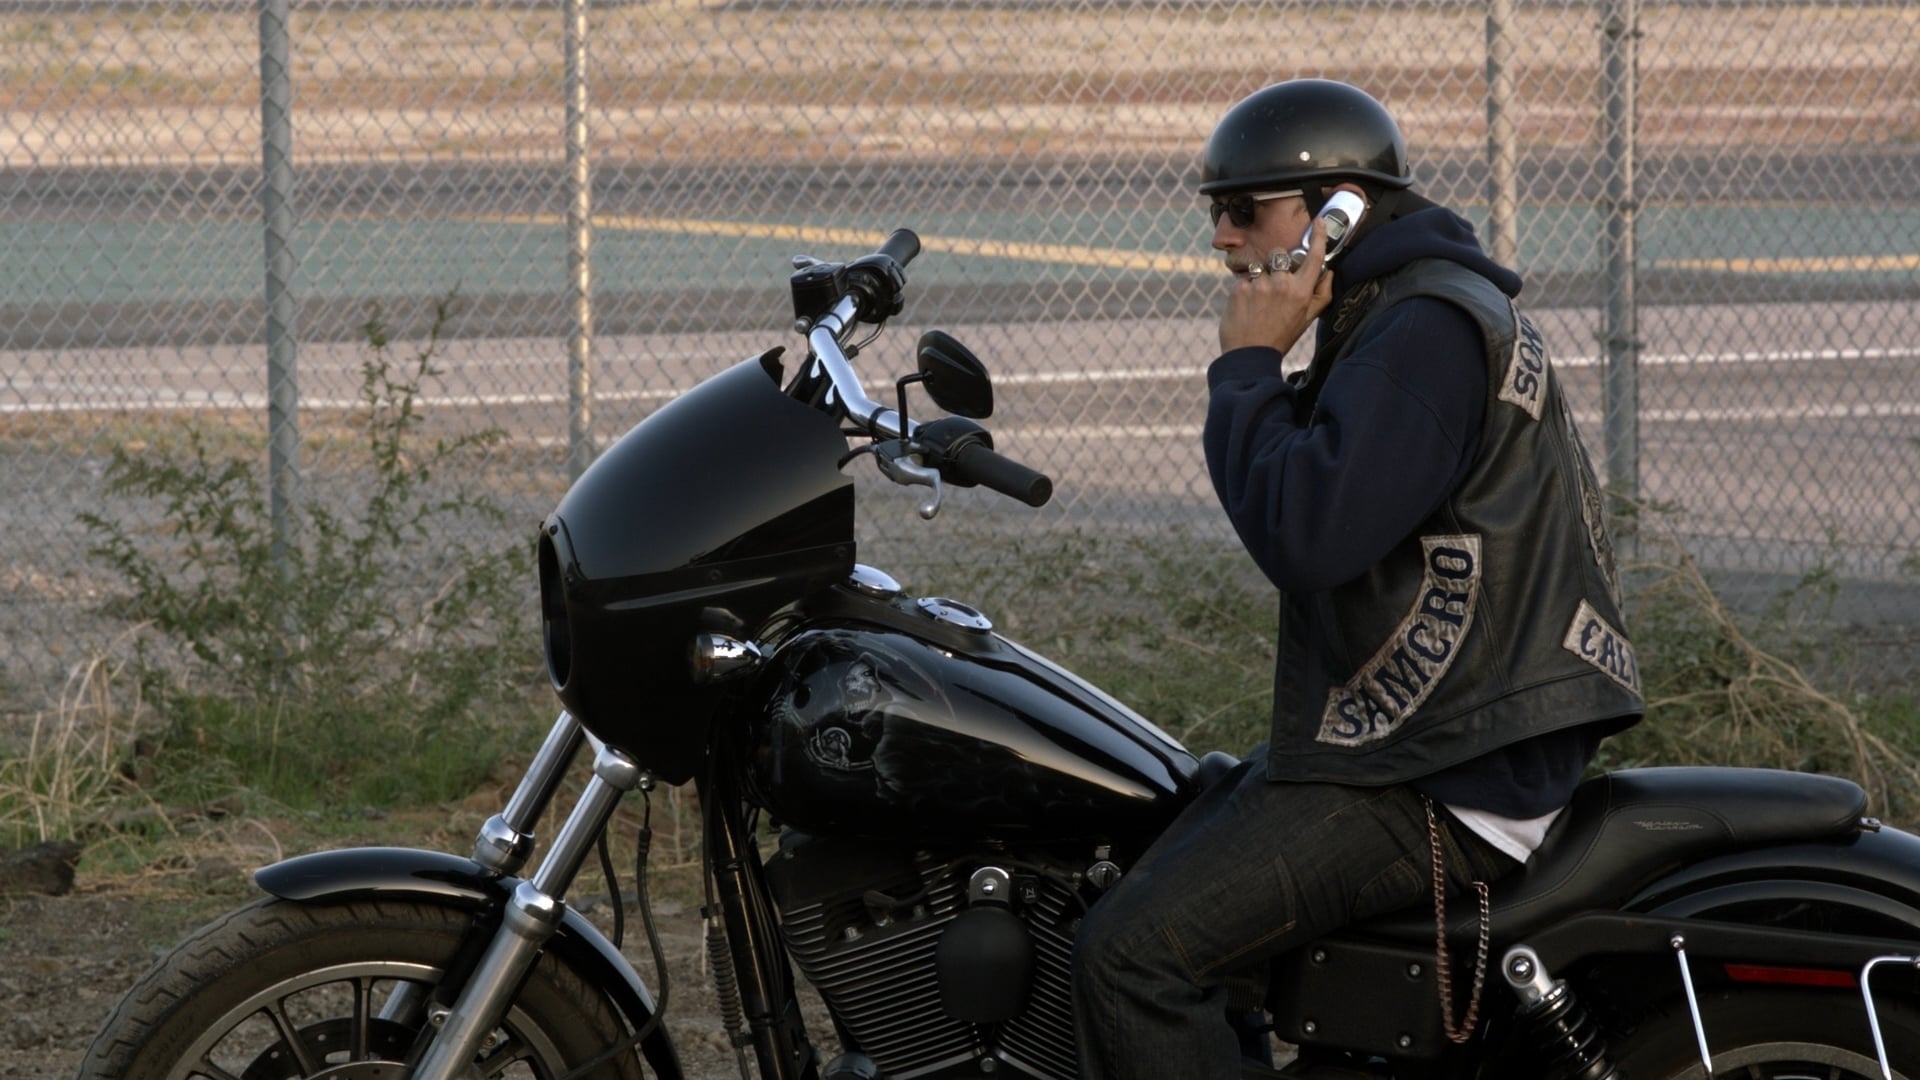 Sons of Anarchy Season 4 Episode 13